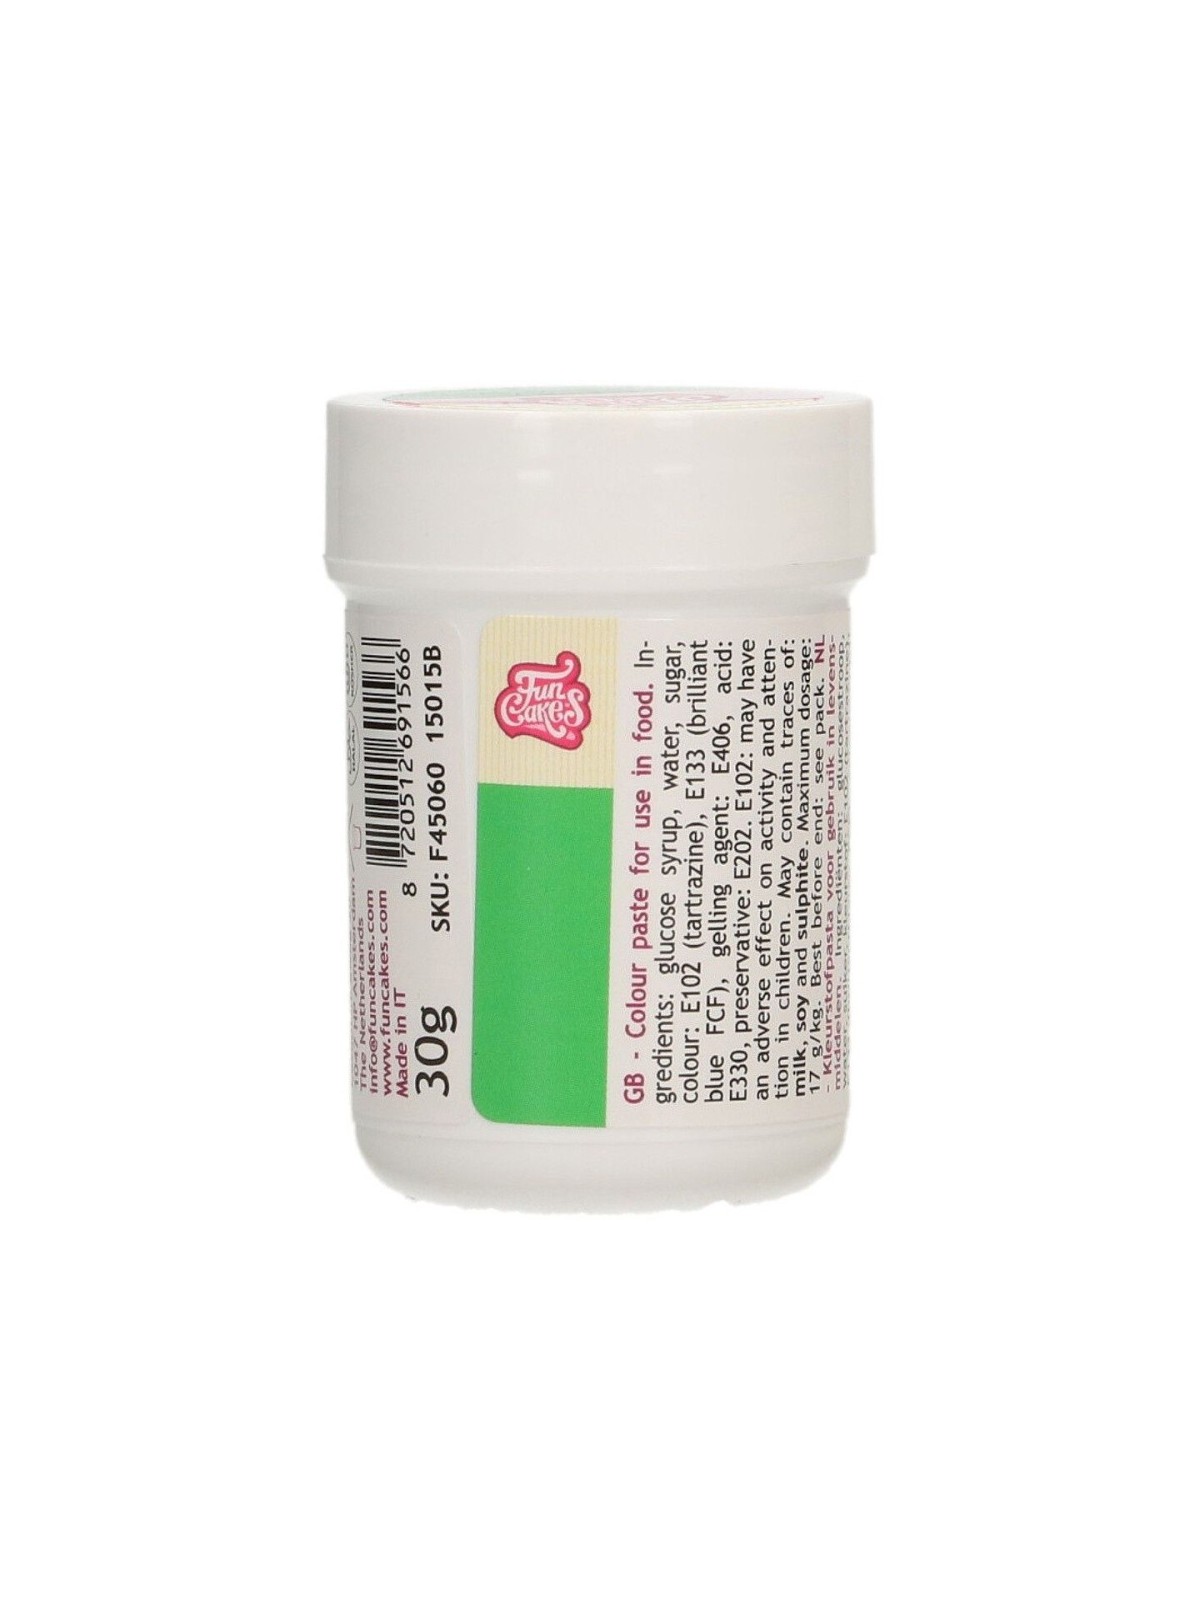 FunColours paste food colour - green - cup 30g